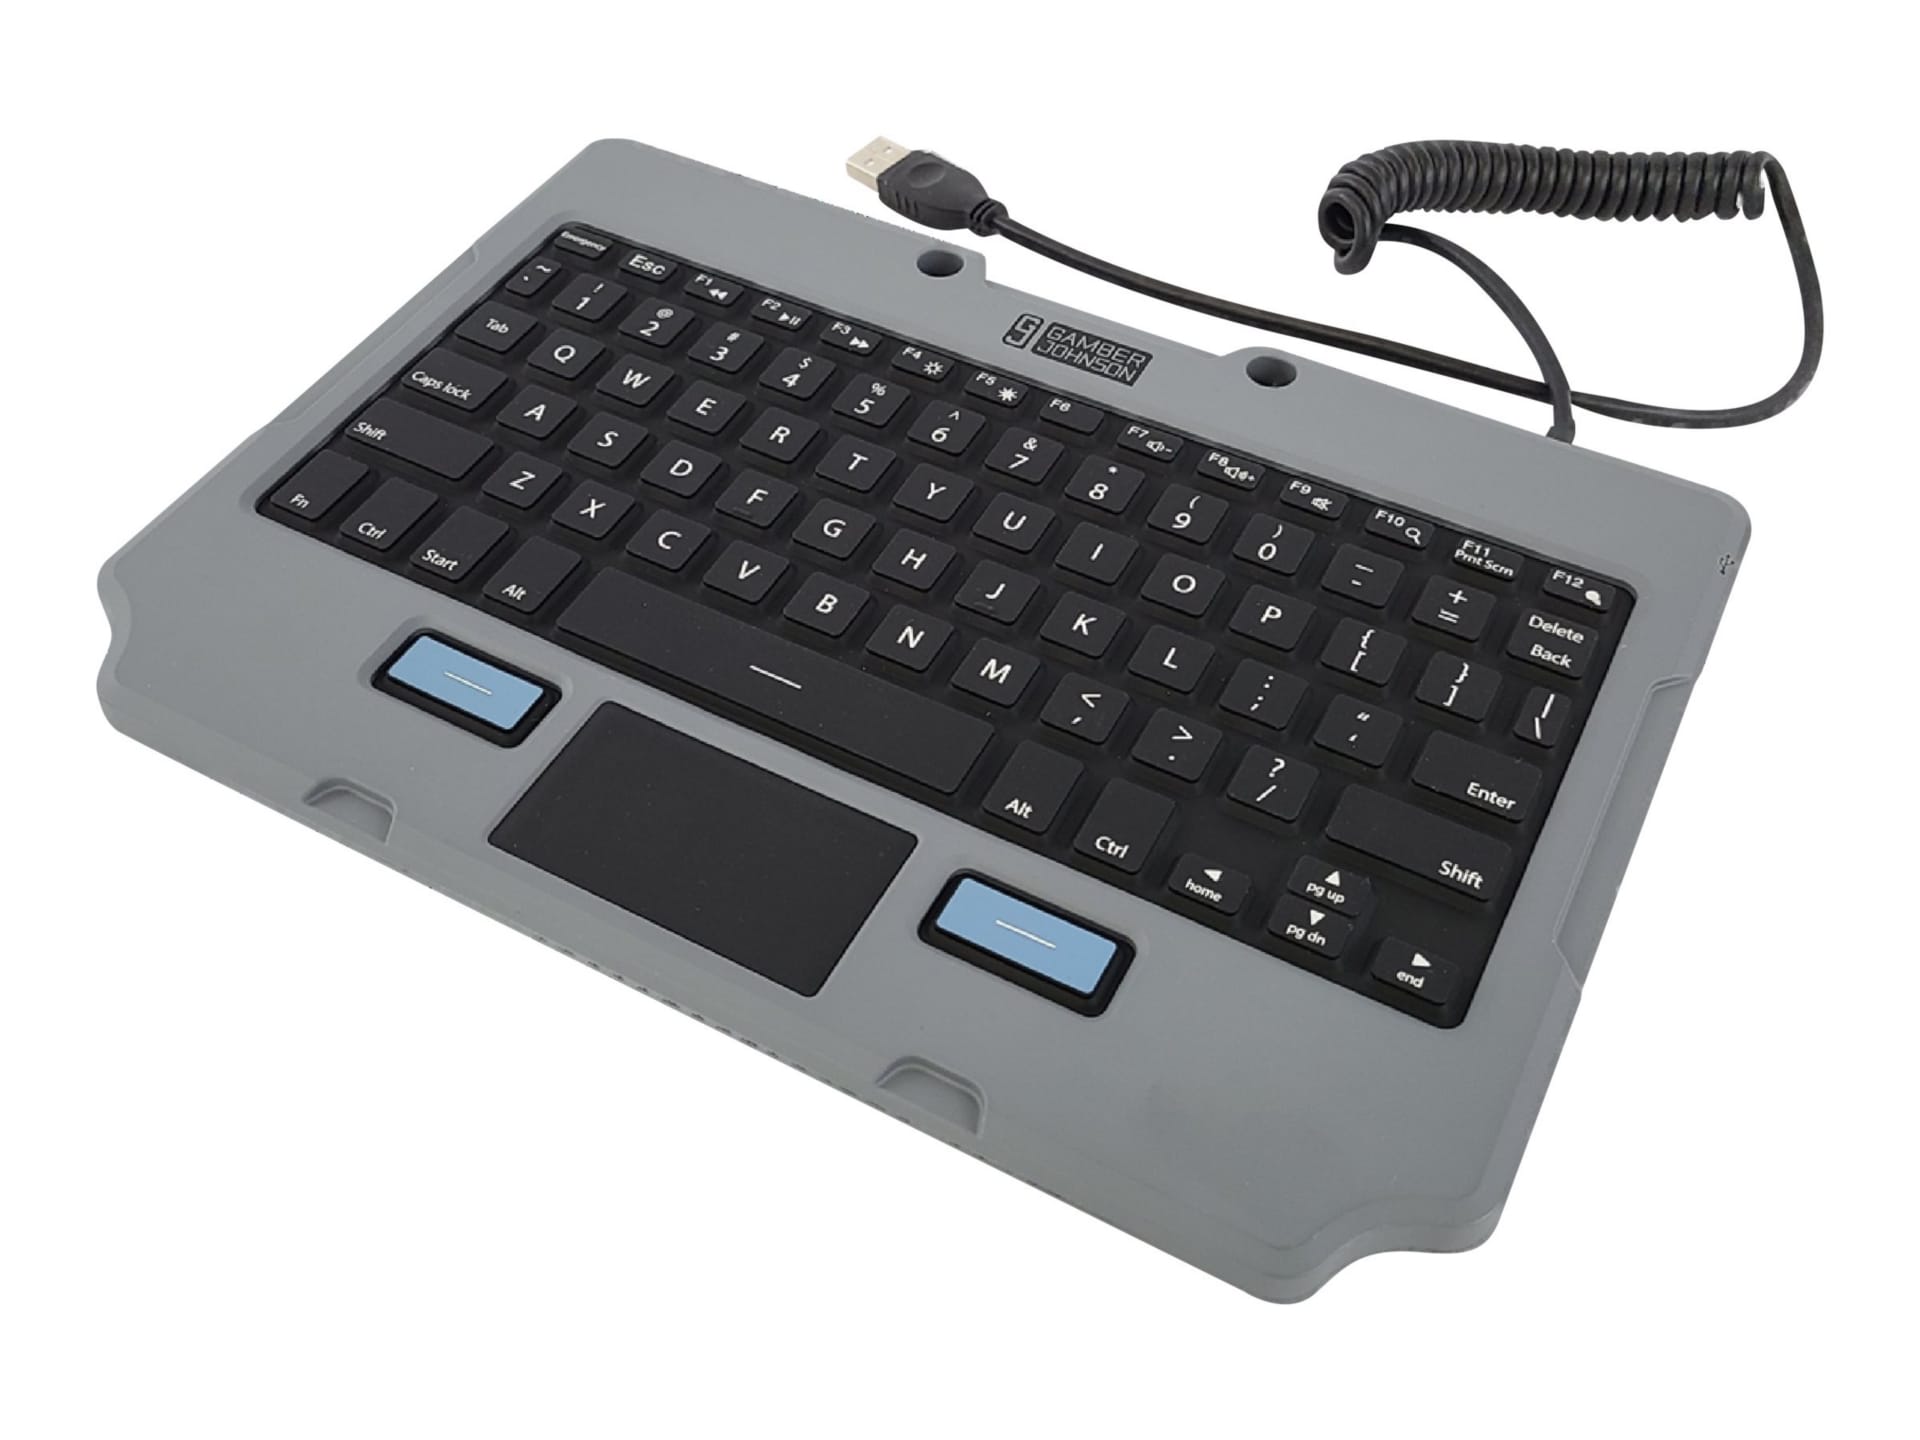 Gamber-Johnson Rugged Lite - keyboard - with touchpad - QWERTY - US - with Quick Release Keyboard Cradle